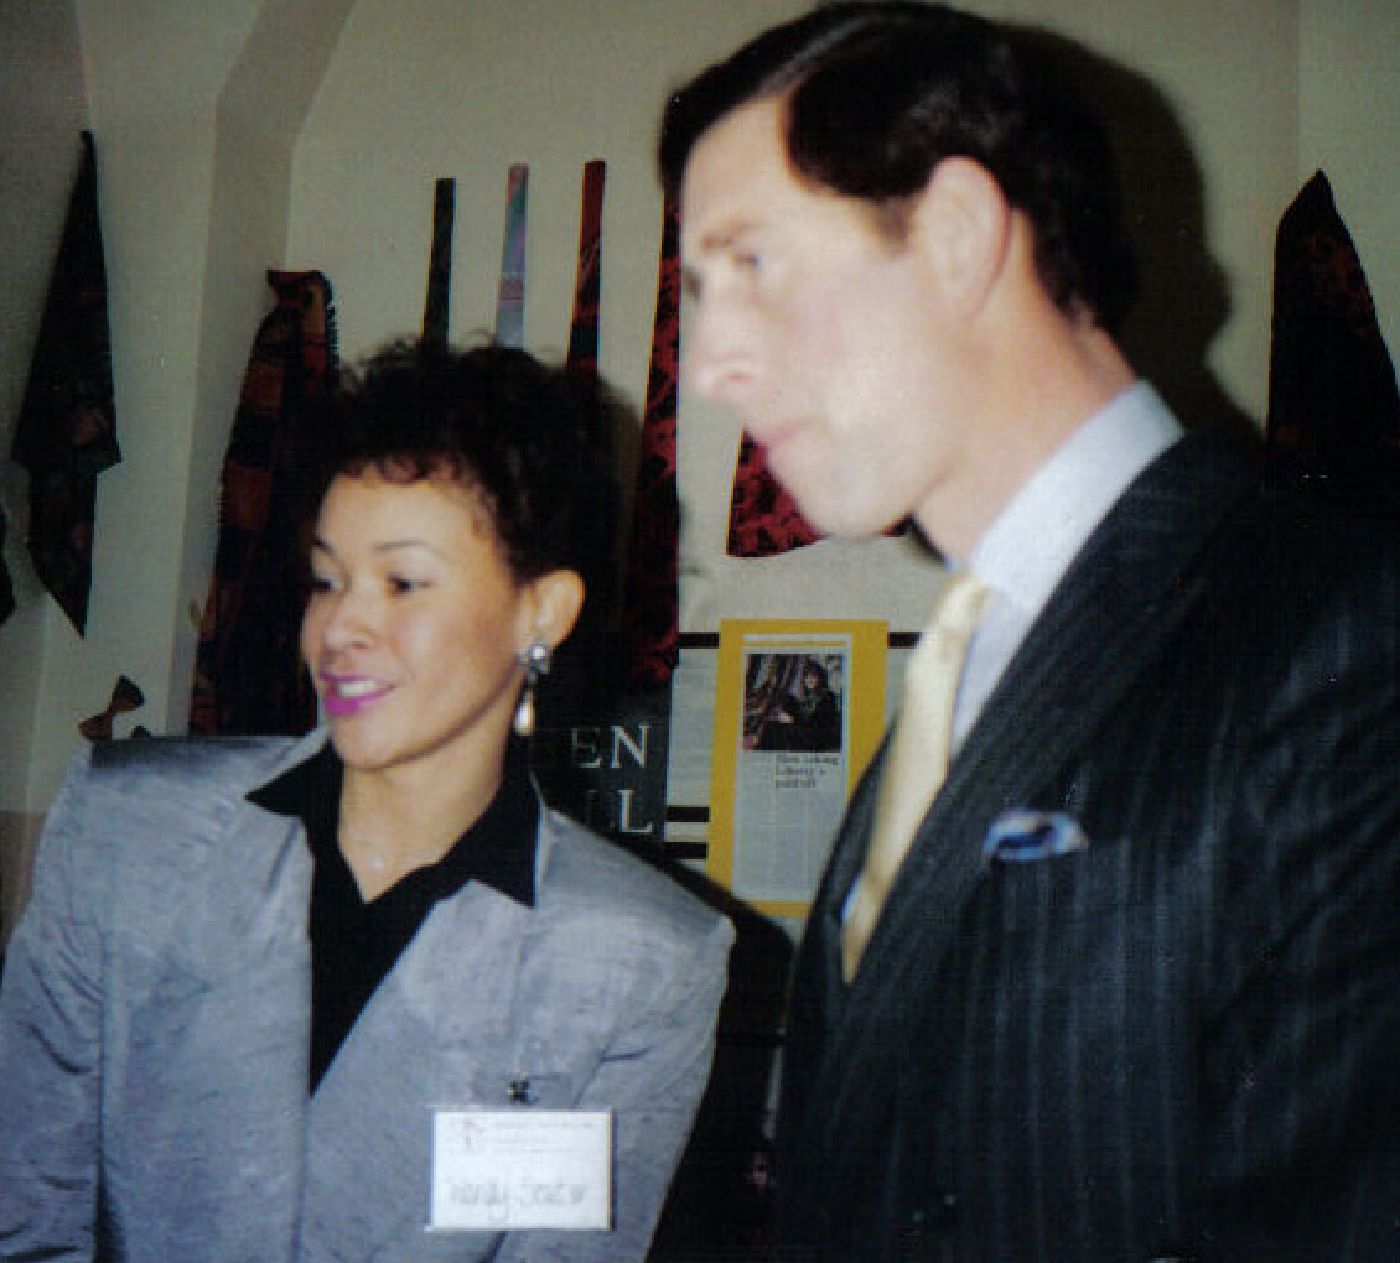 Wendy Souter with HRH Prince Charles as he was then, now King Charles III, at opening of OTC - UK in 1988